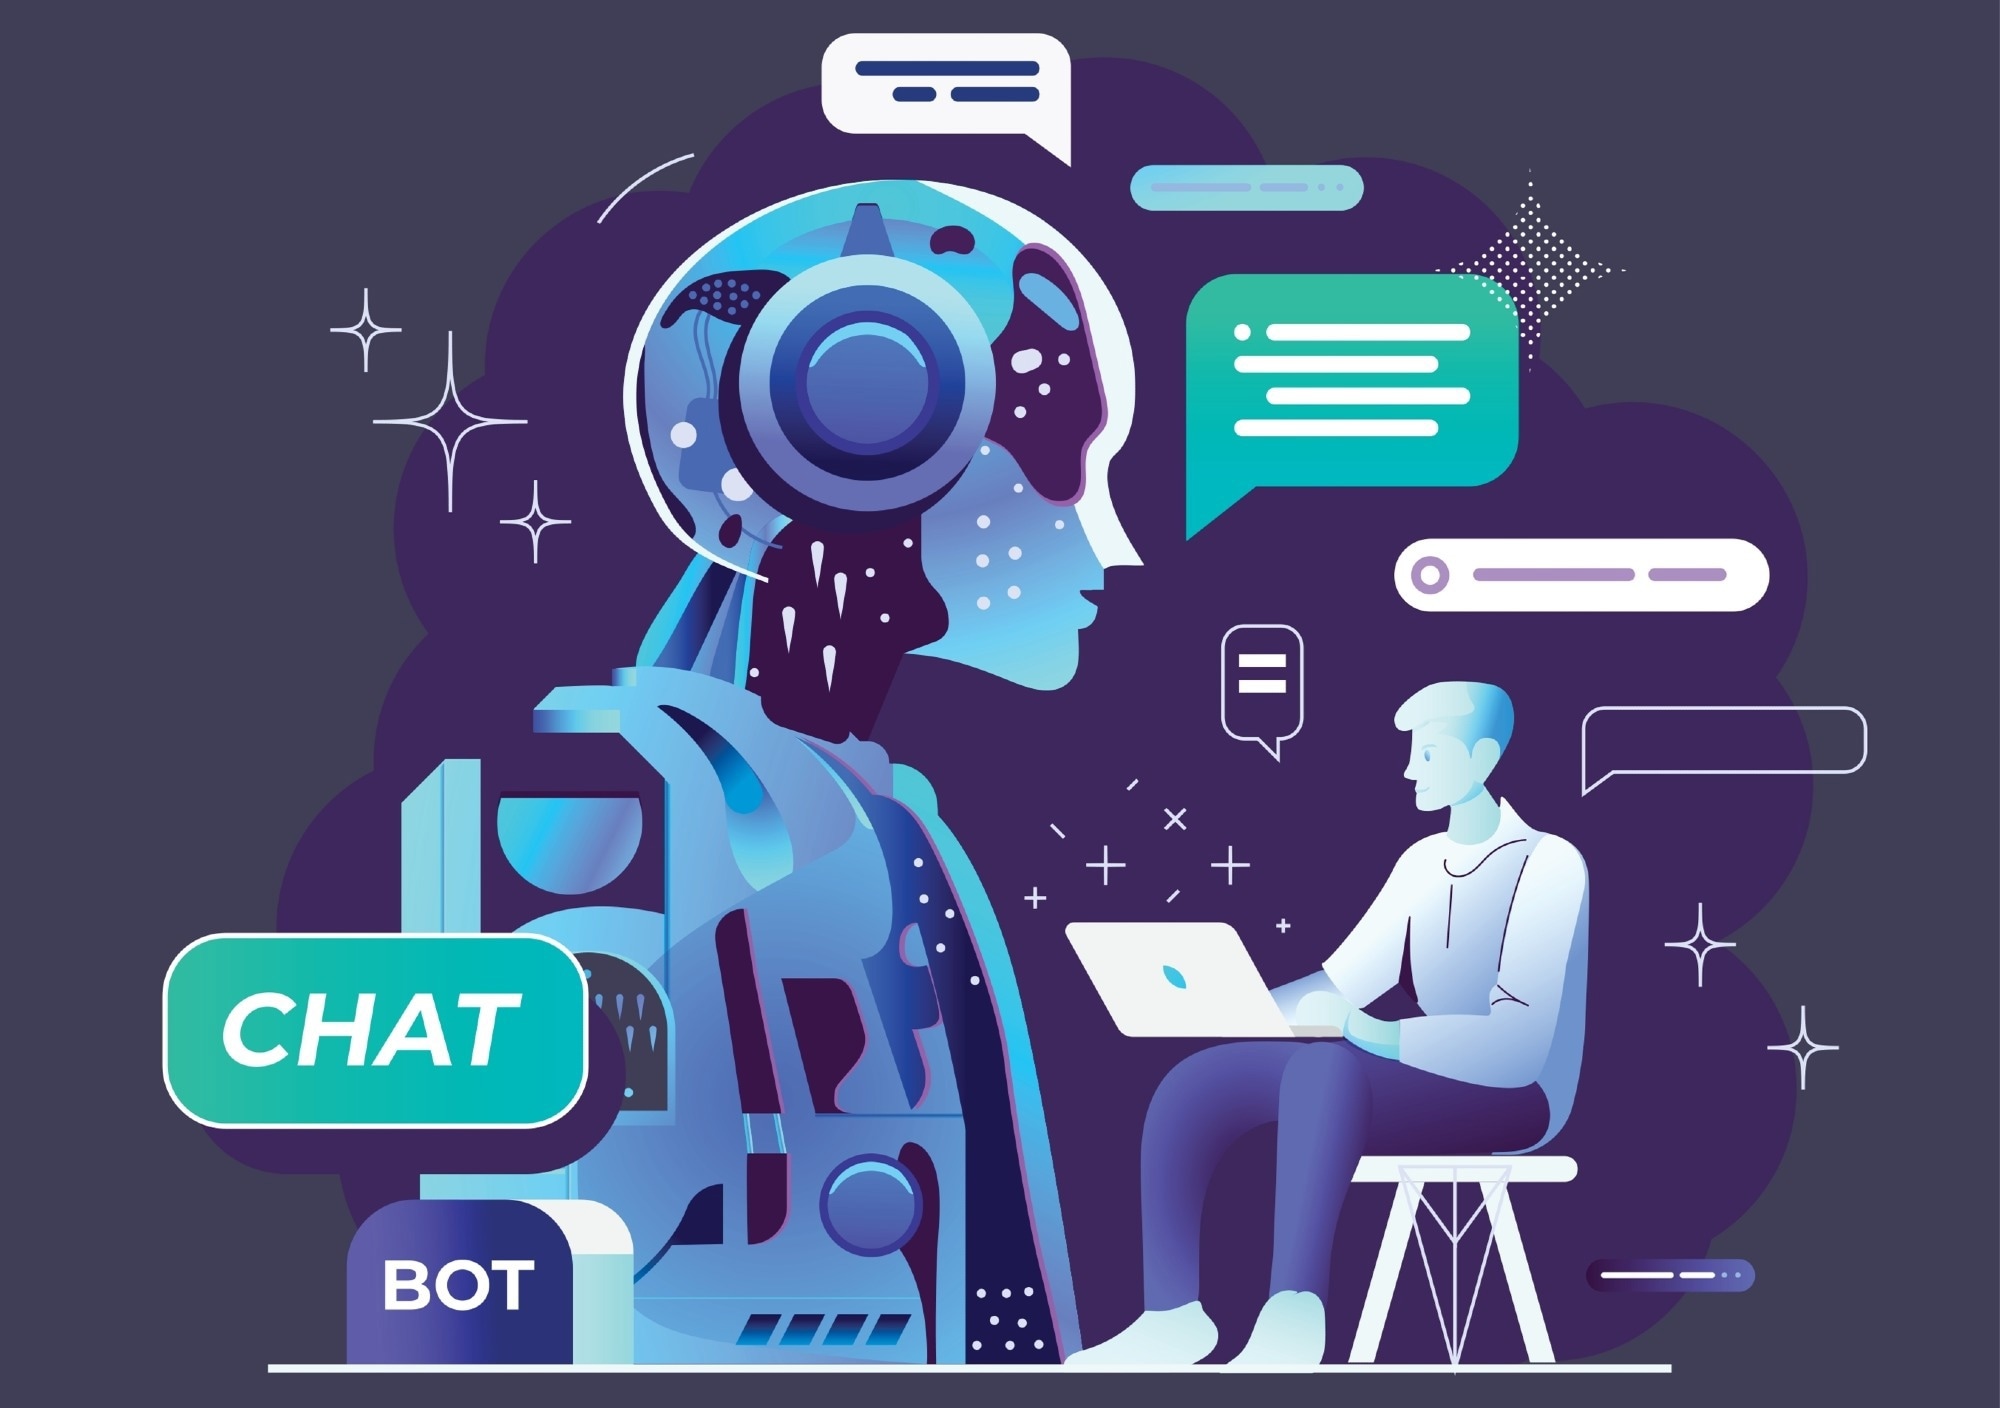 Study: Accuracy and Reliability of Chatbot Responses to Physician Questions. Image Credit: CkyBe / Shutterstock